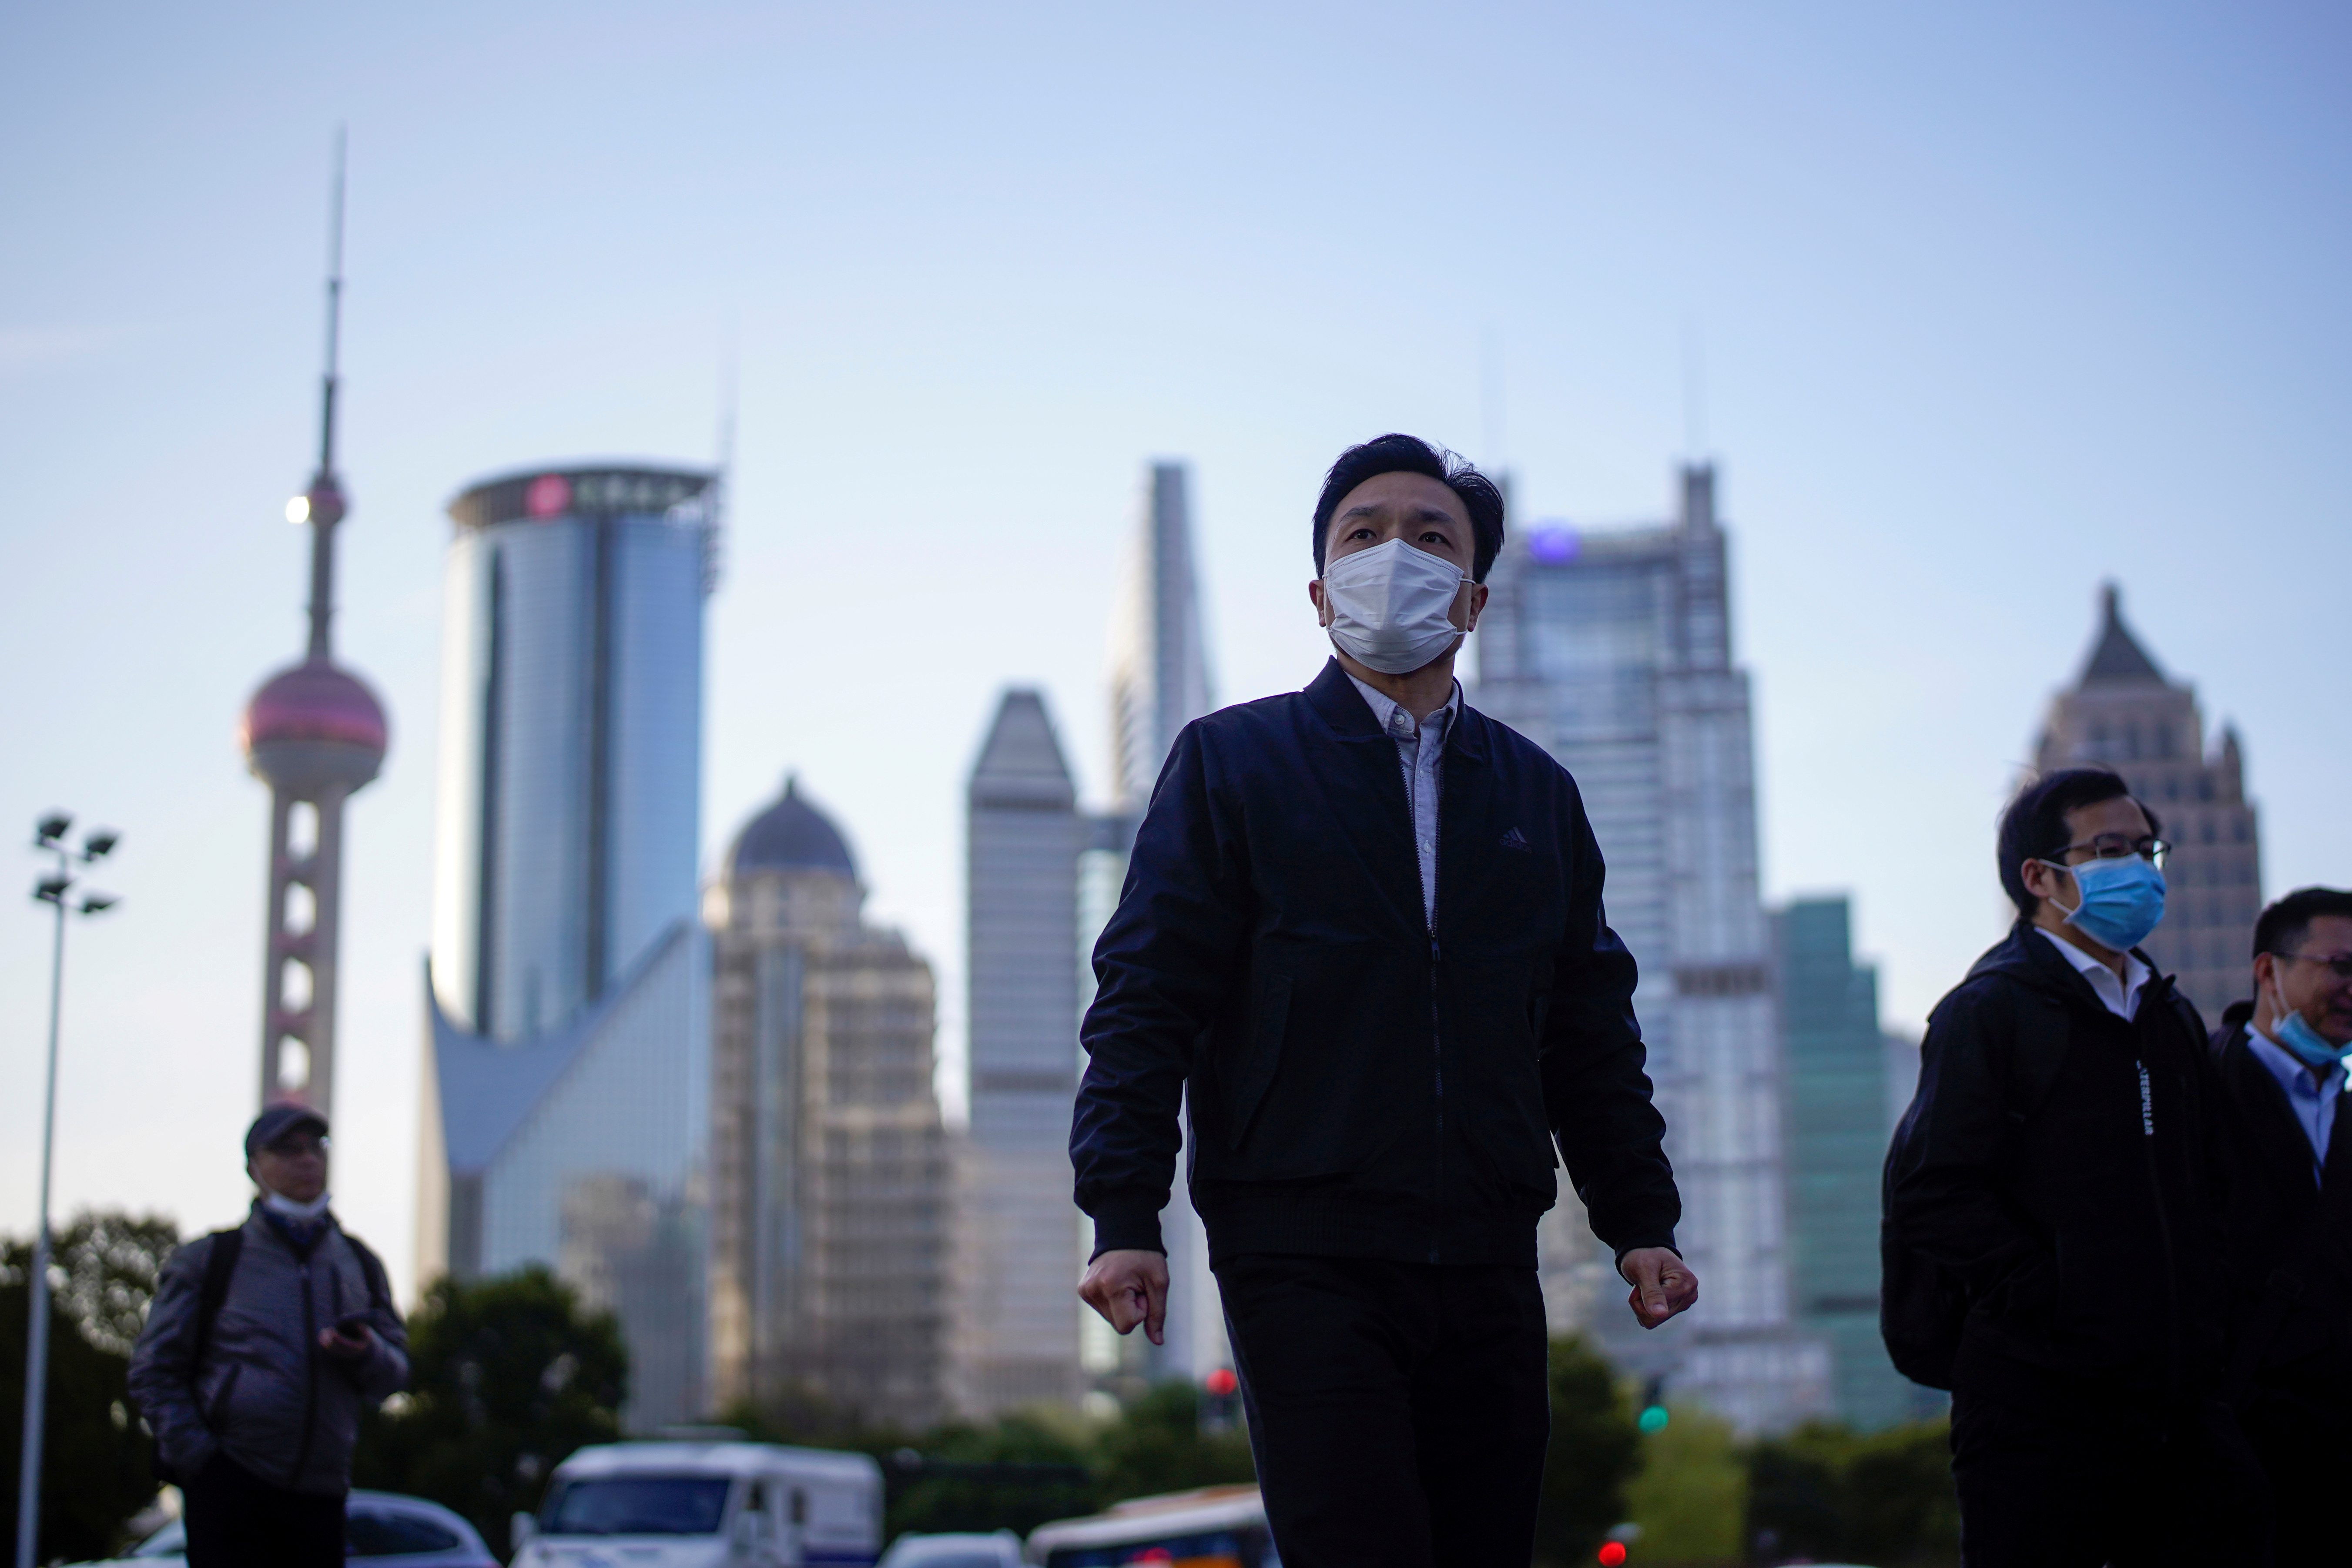 People wear protective face masks, following an outbreak of the novel coronavirus disease (COVID-19), at Lujiazui financial district in Shanghai